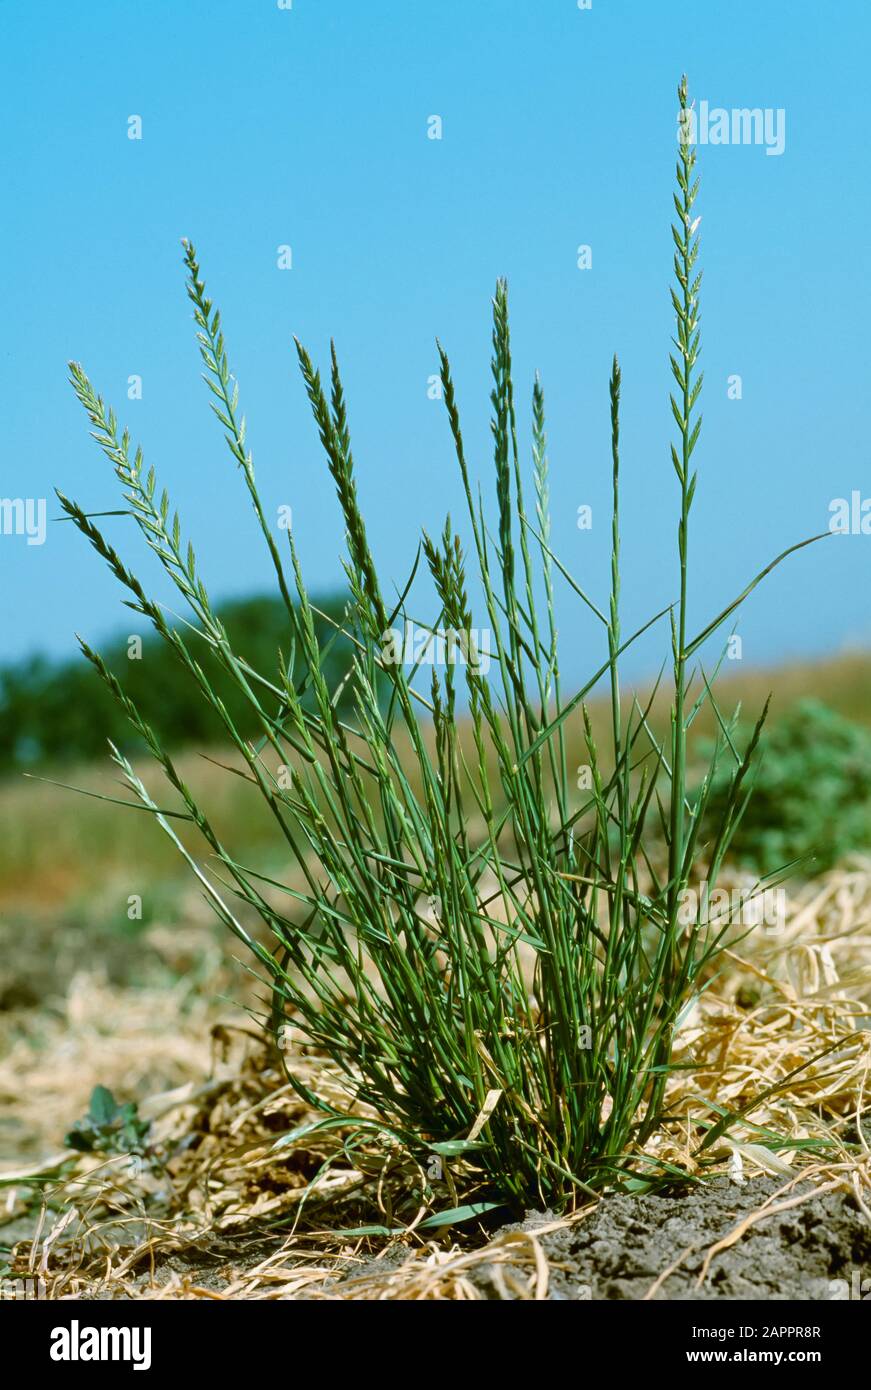 Agriculture - Weeds, Italian Ryegrass (Lolium multiflorum) aka. Annual Ryegrass, Australian Ryegrass; plant in inflorescence / California, USA. Stock Photo